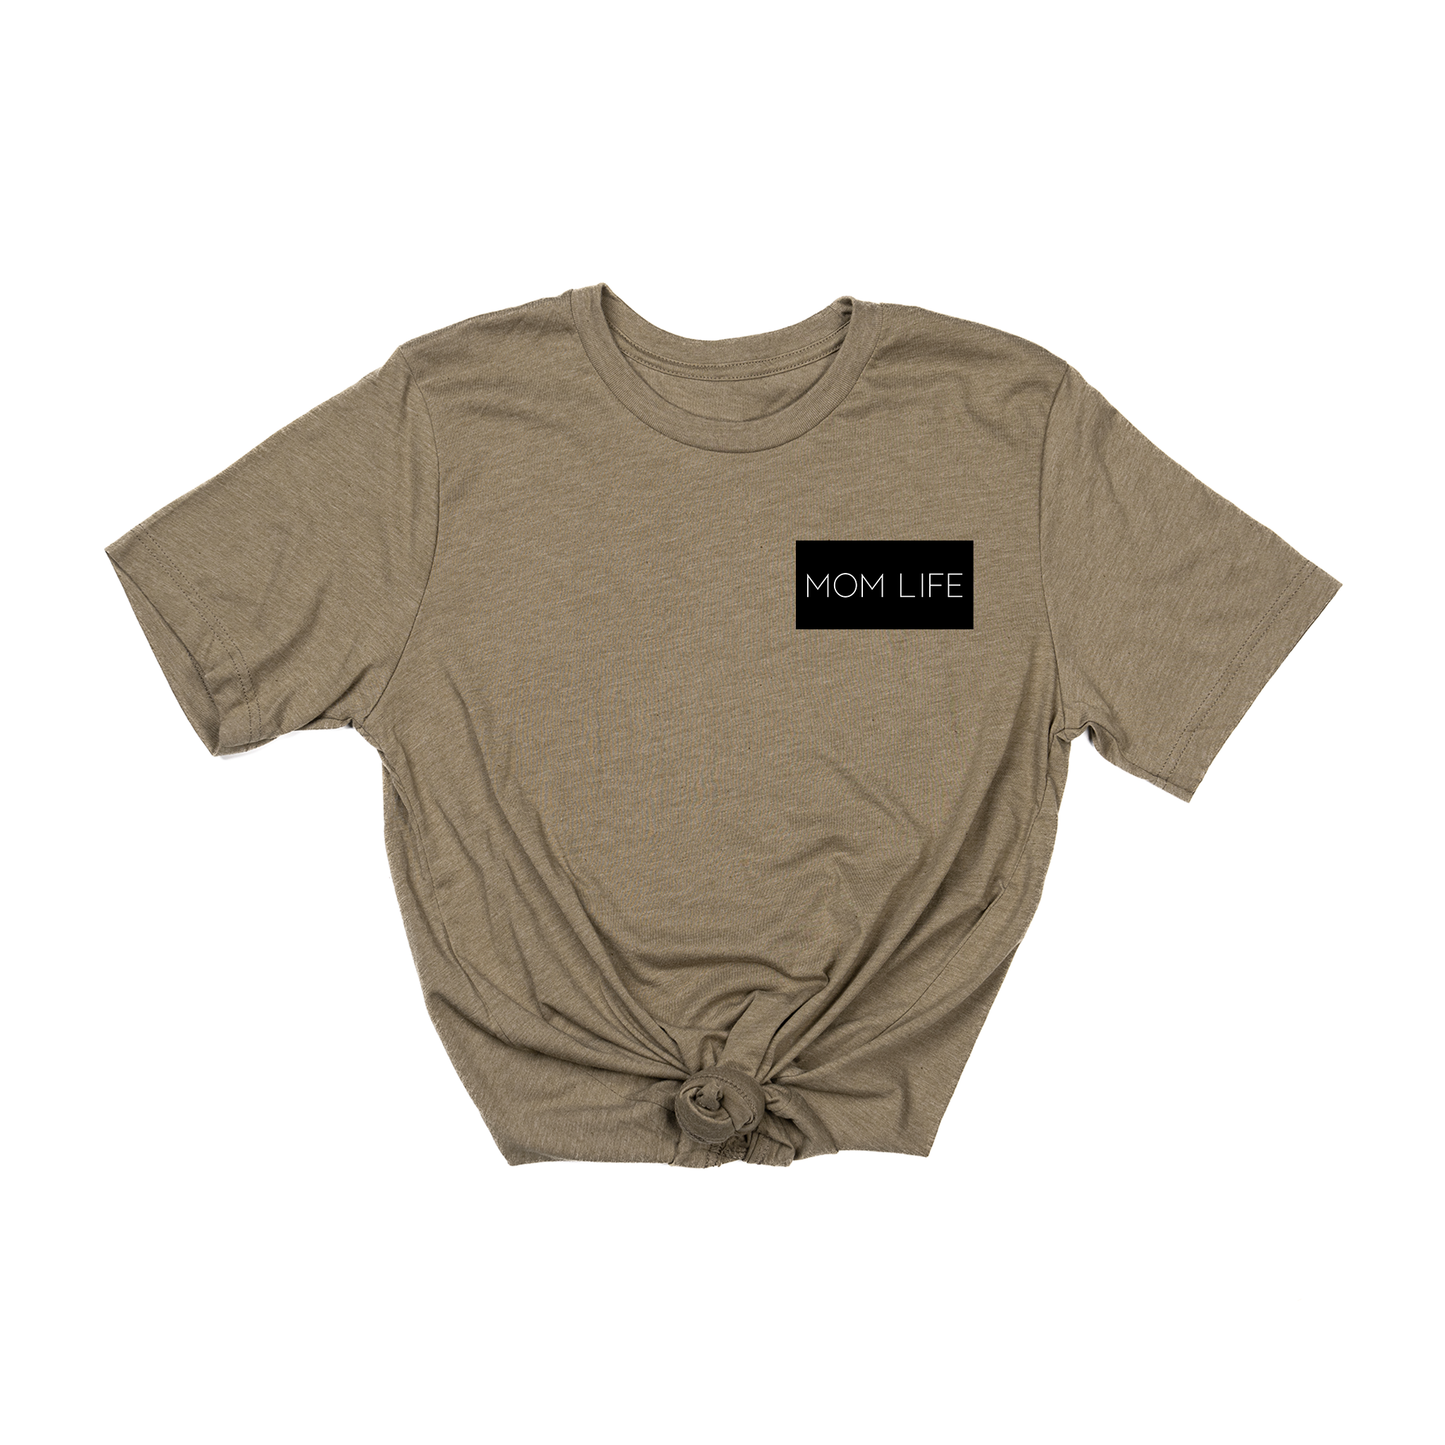 Mom Life (Boxed Collection, Pocket, Black Box/White Text) - Tee (Olive)